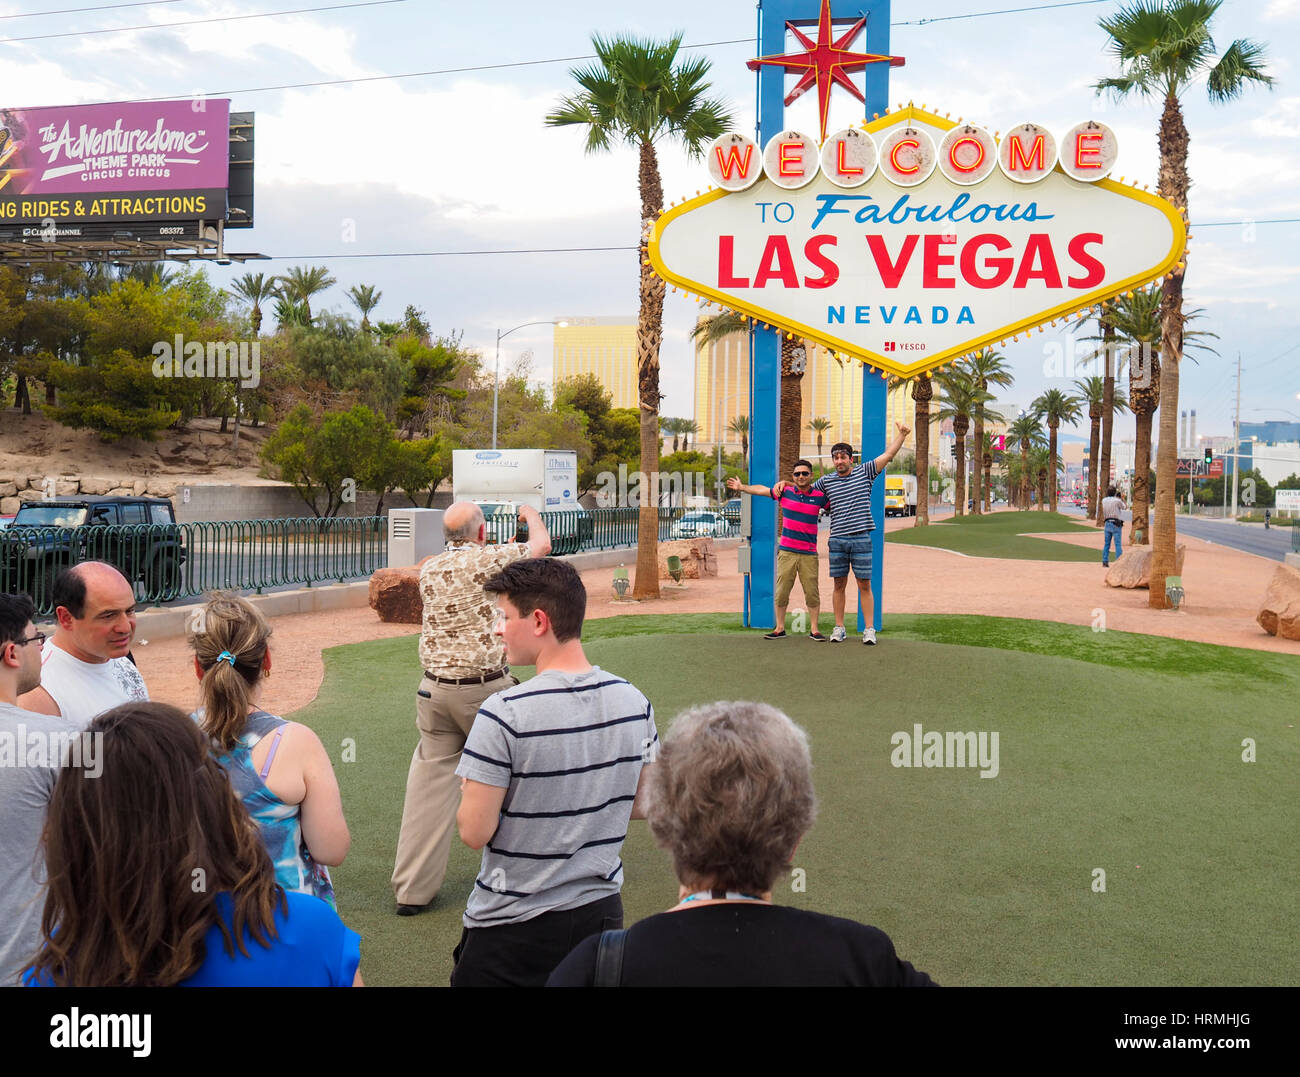 Crowds of tourists are gathering at the 'Welcome to Fabulous Las Vegas' sign, famous landmark at the end of the Las Vegas Boulevard and entry point to Stock Photo